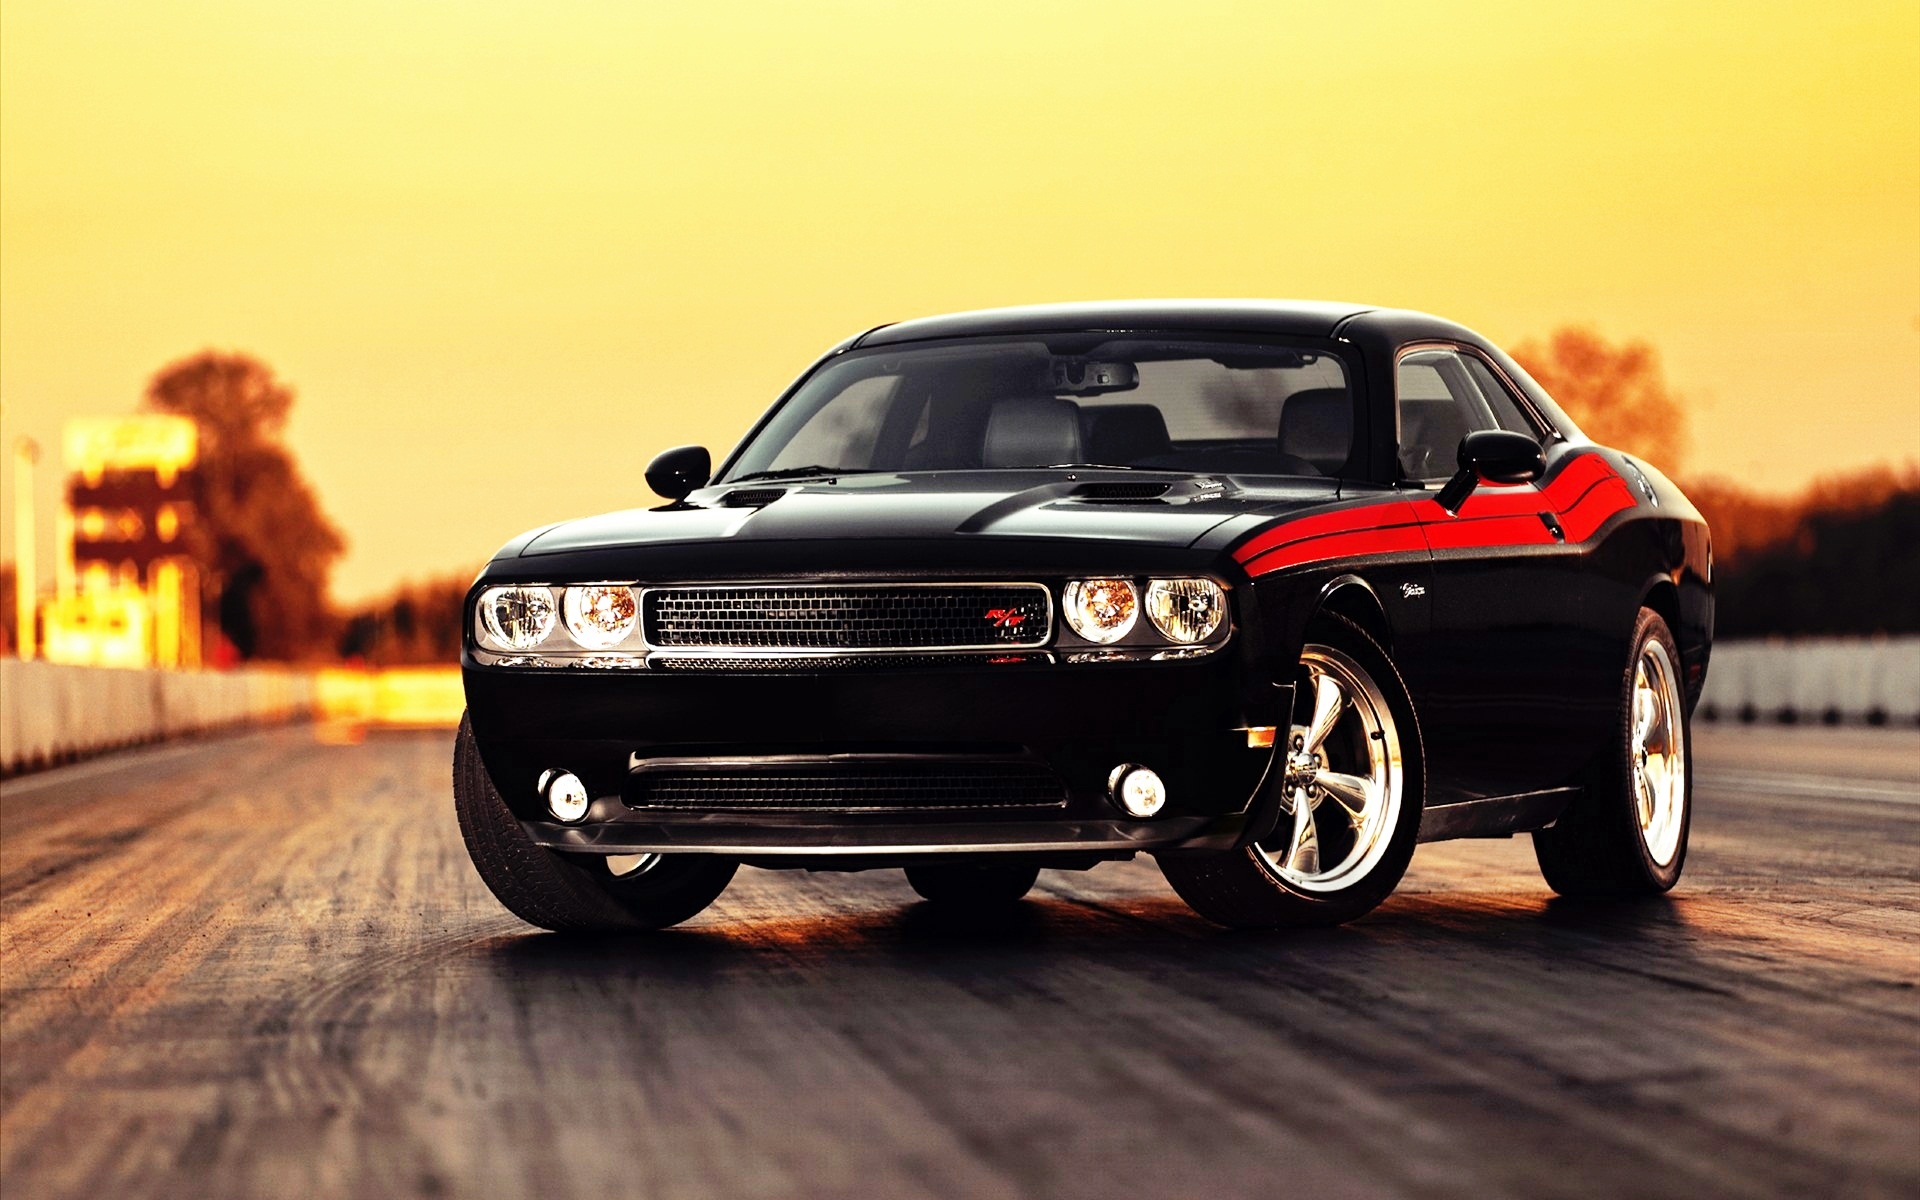 Dodge Challenger, HD wallpapers, Muscle car madness, Car enthusiast, 1920x1200 HD Desktop